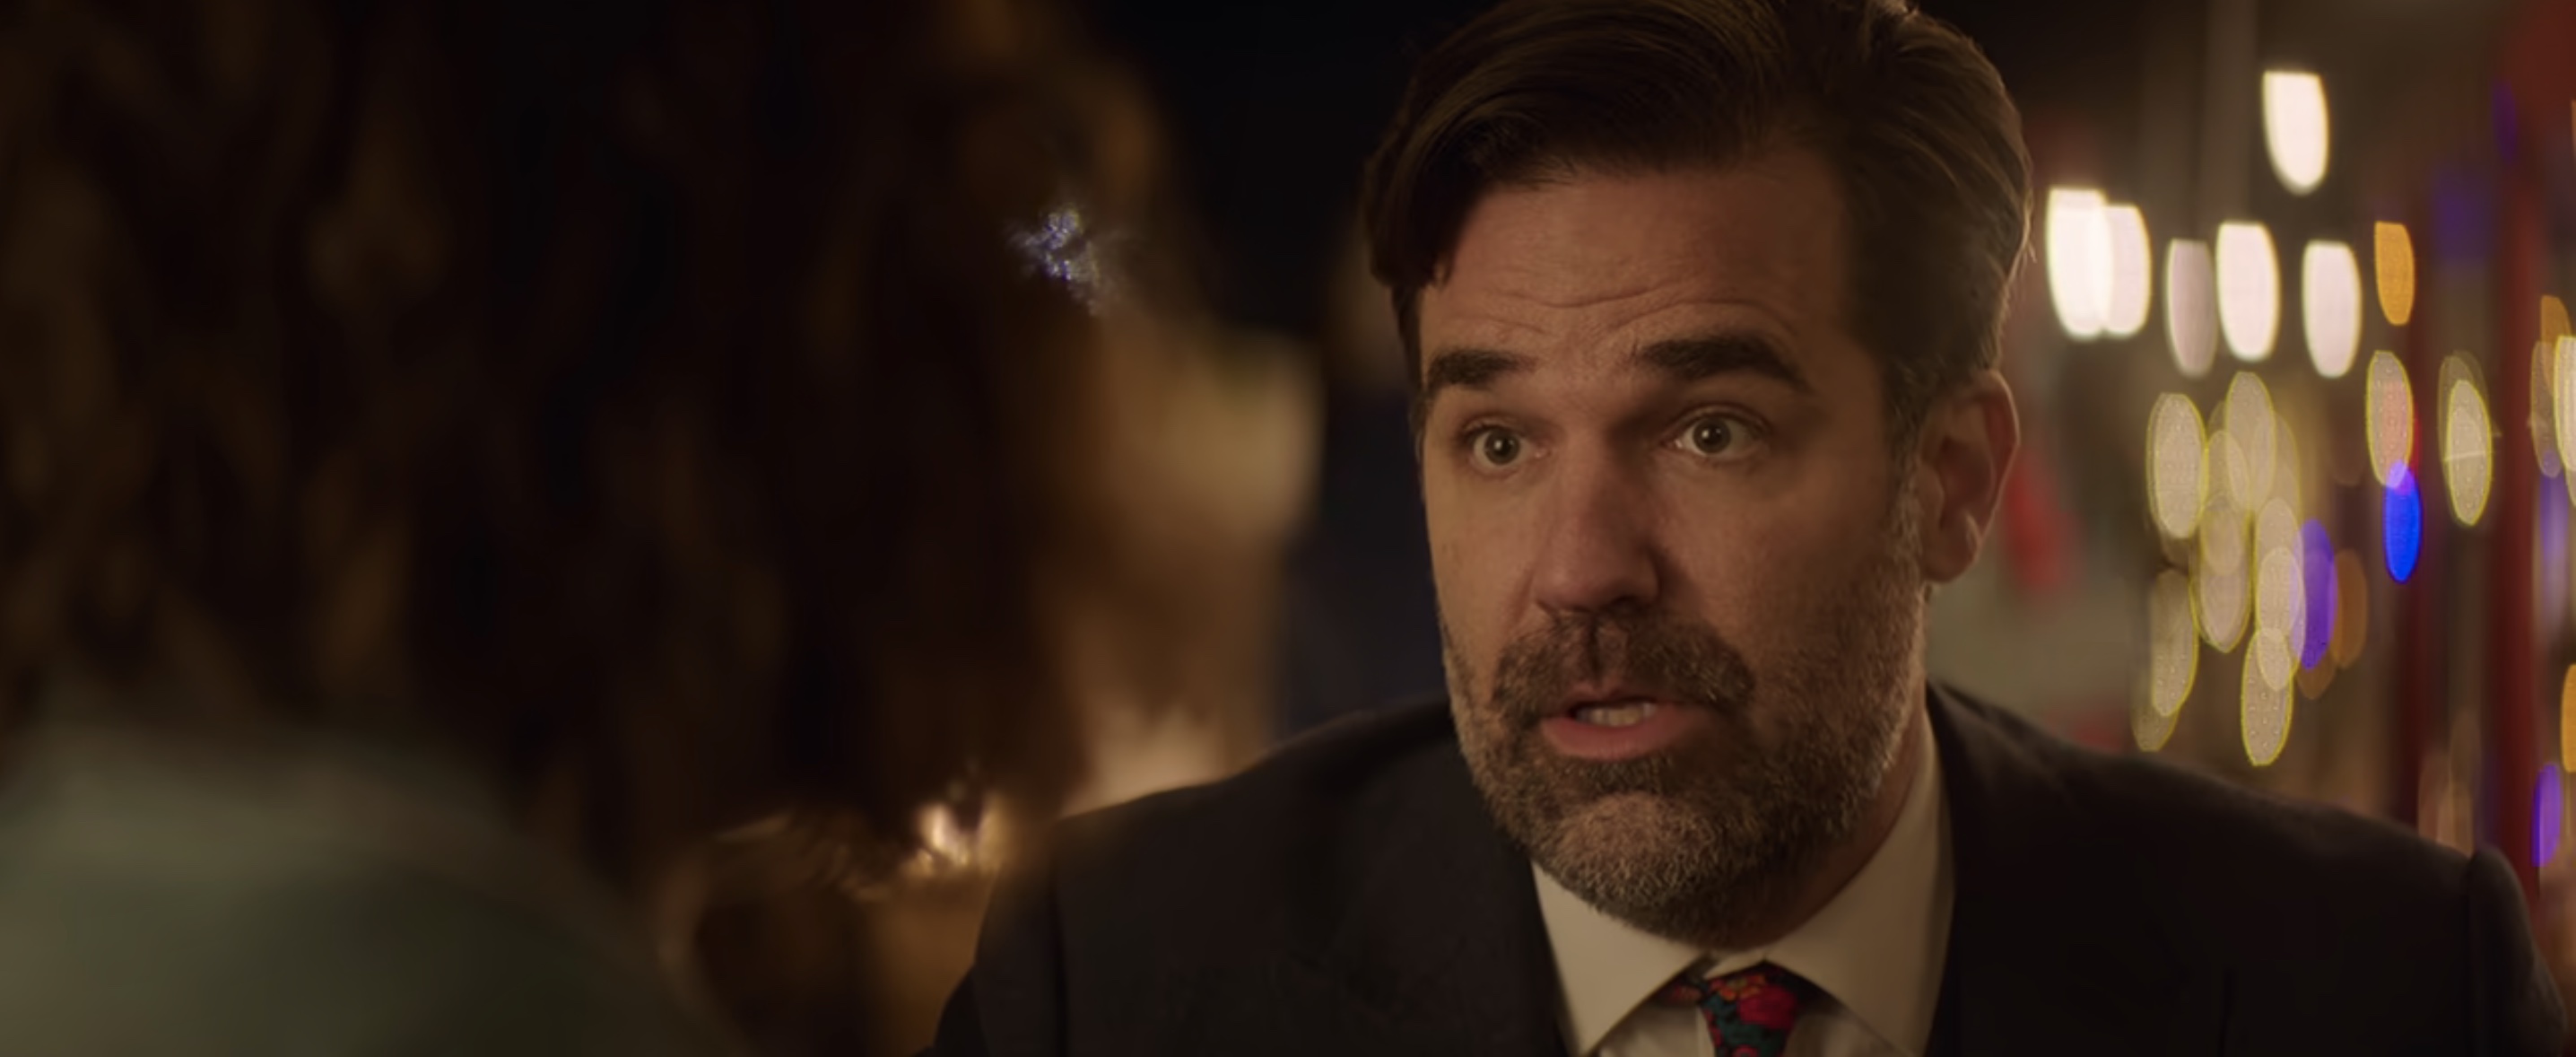 Love at First Sight Cast on Netflix - Rob Delaney as Andrew Sullivan